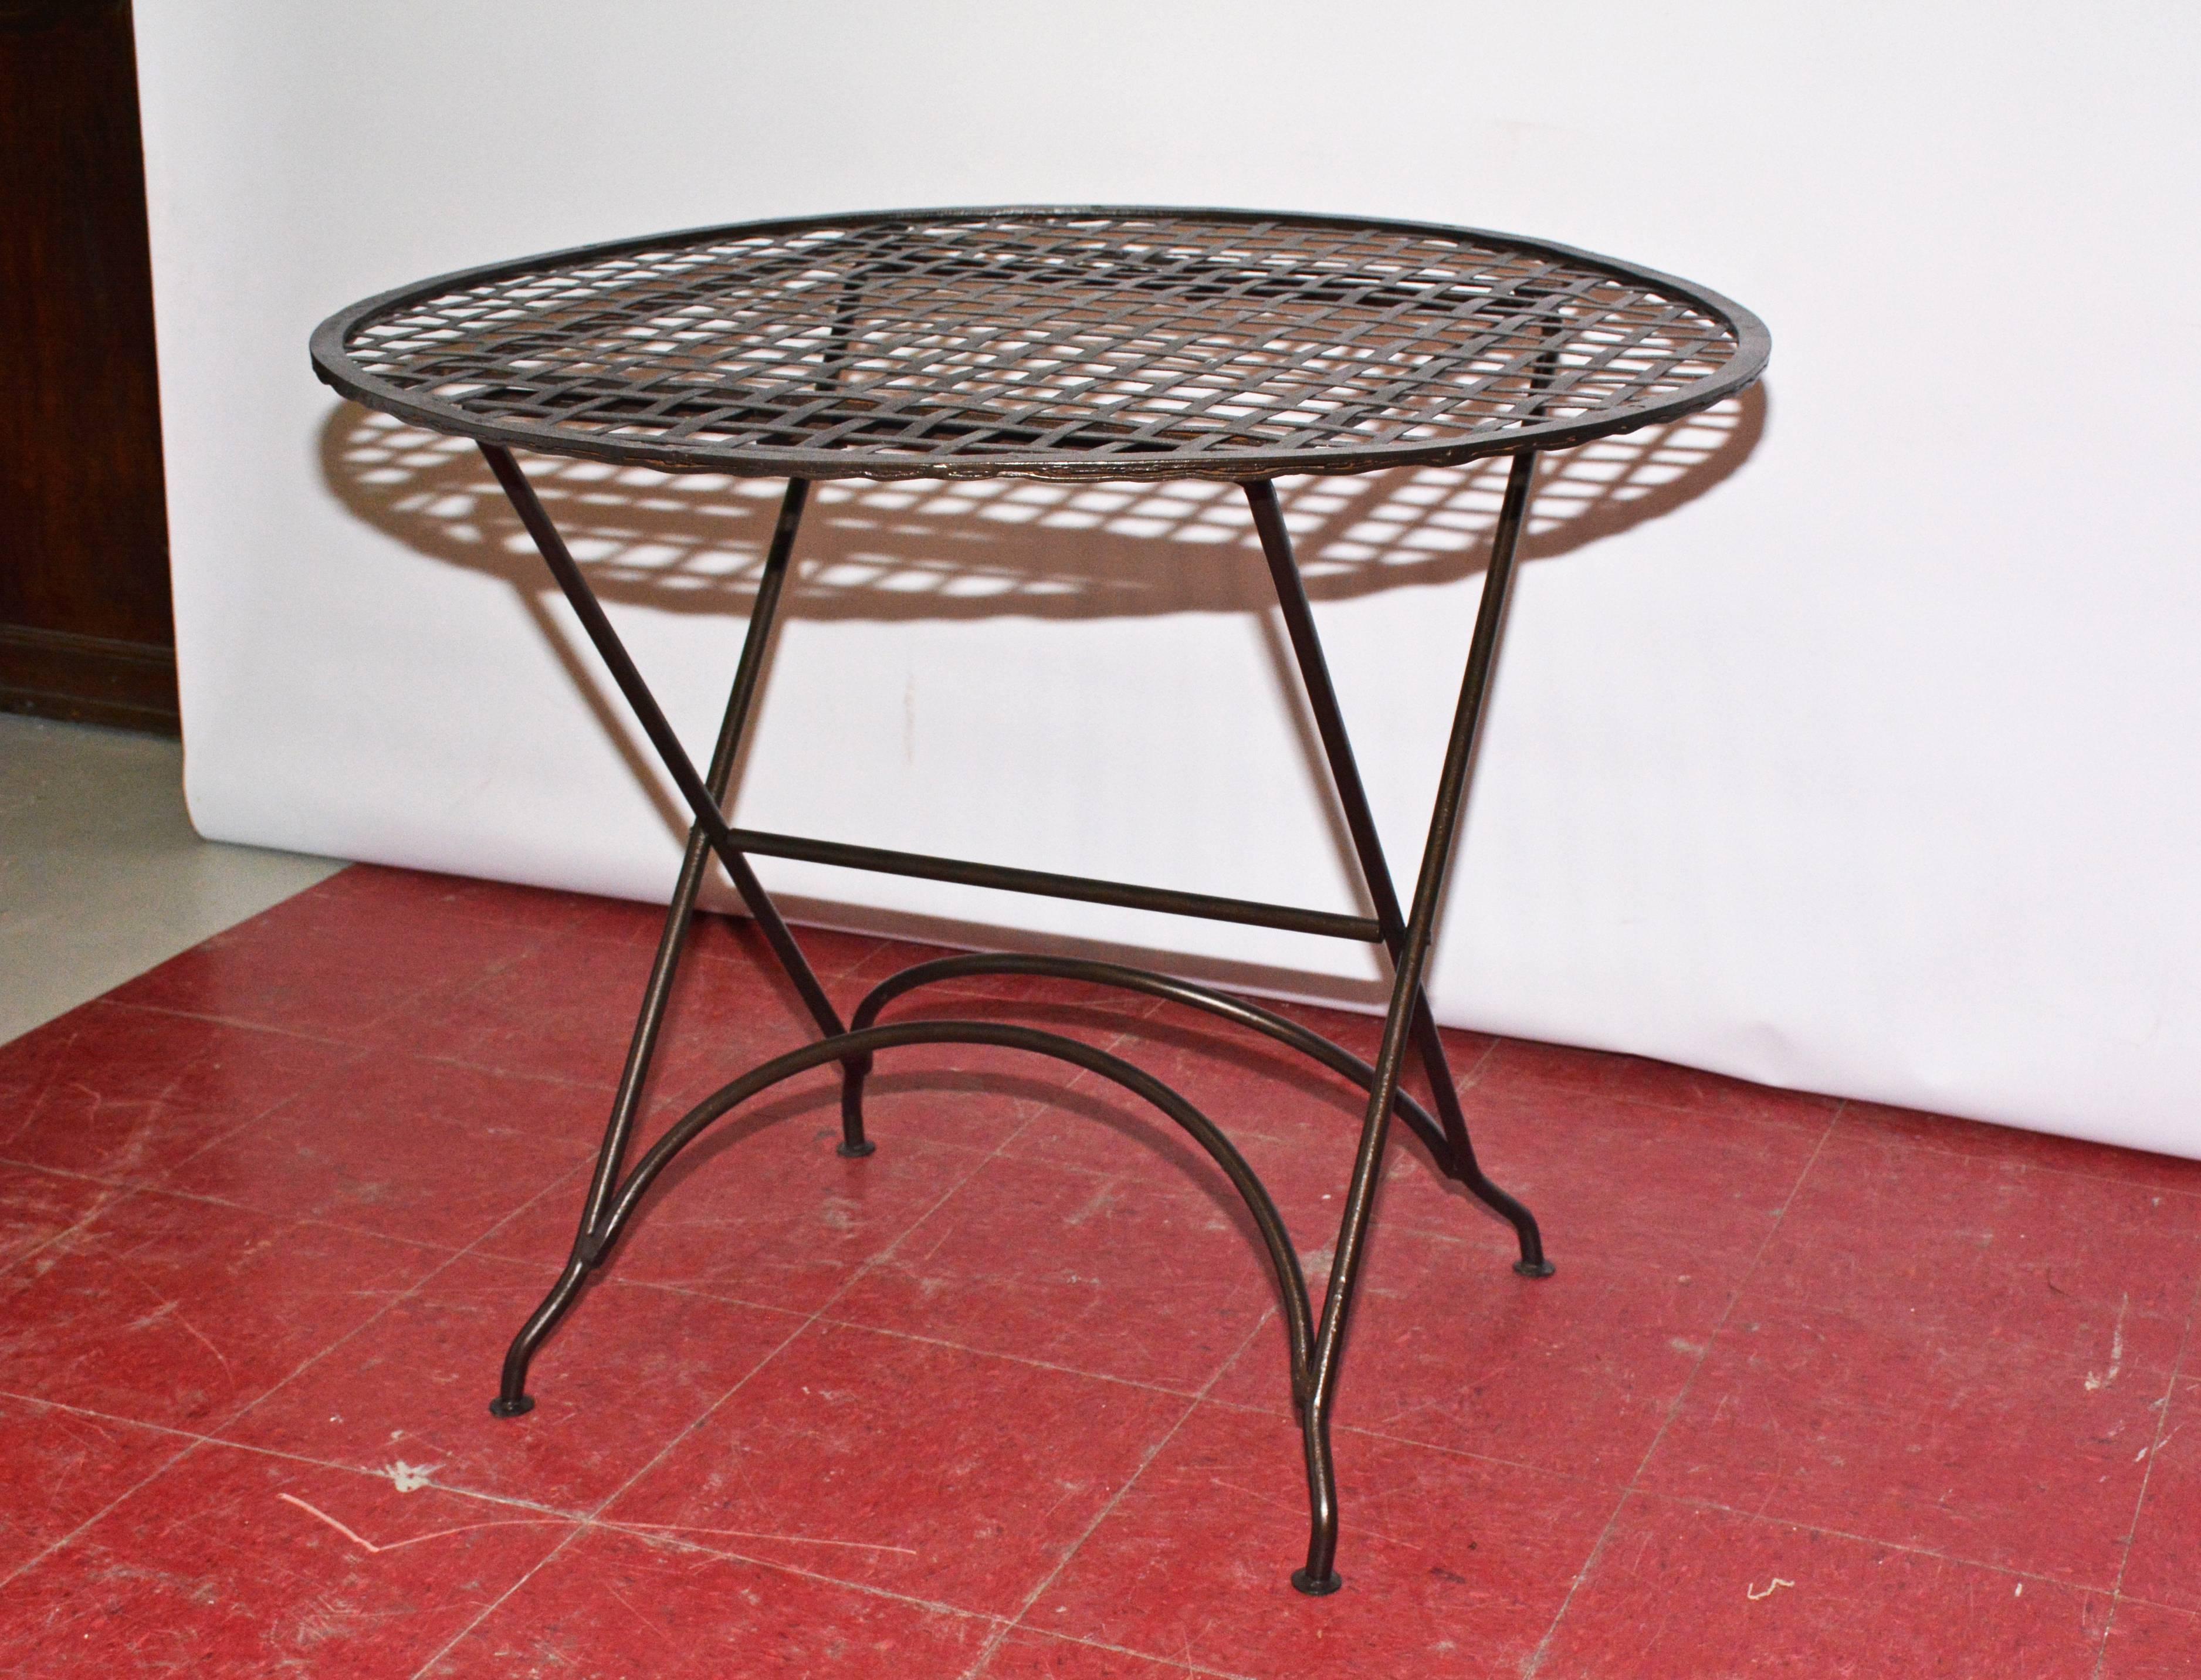 Indoor or outdoor bistro table with cross-hatch banded tabletop of iron attached to a rim. The top of one side of the criss-cross legs can be unhooked from underneath the tabletop and folded flat while the top can be laid flat against the legs. Can